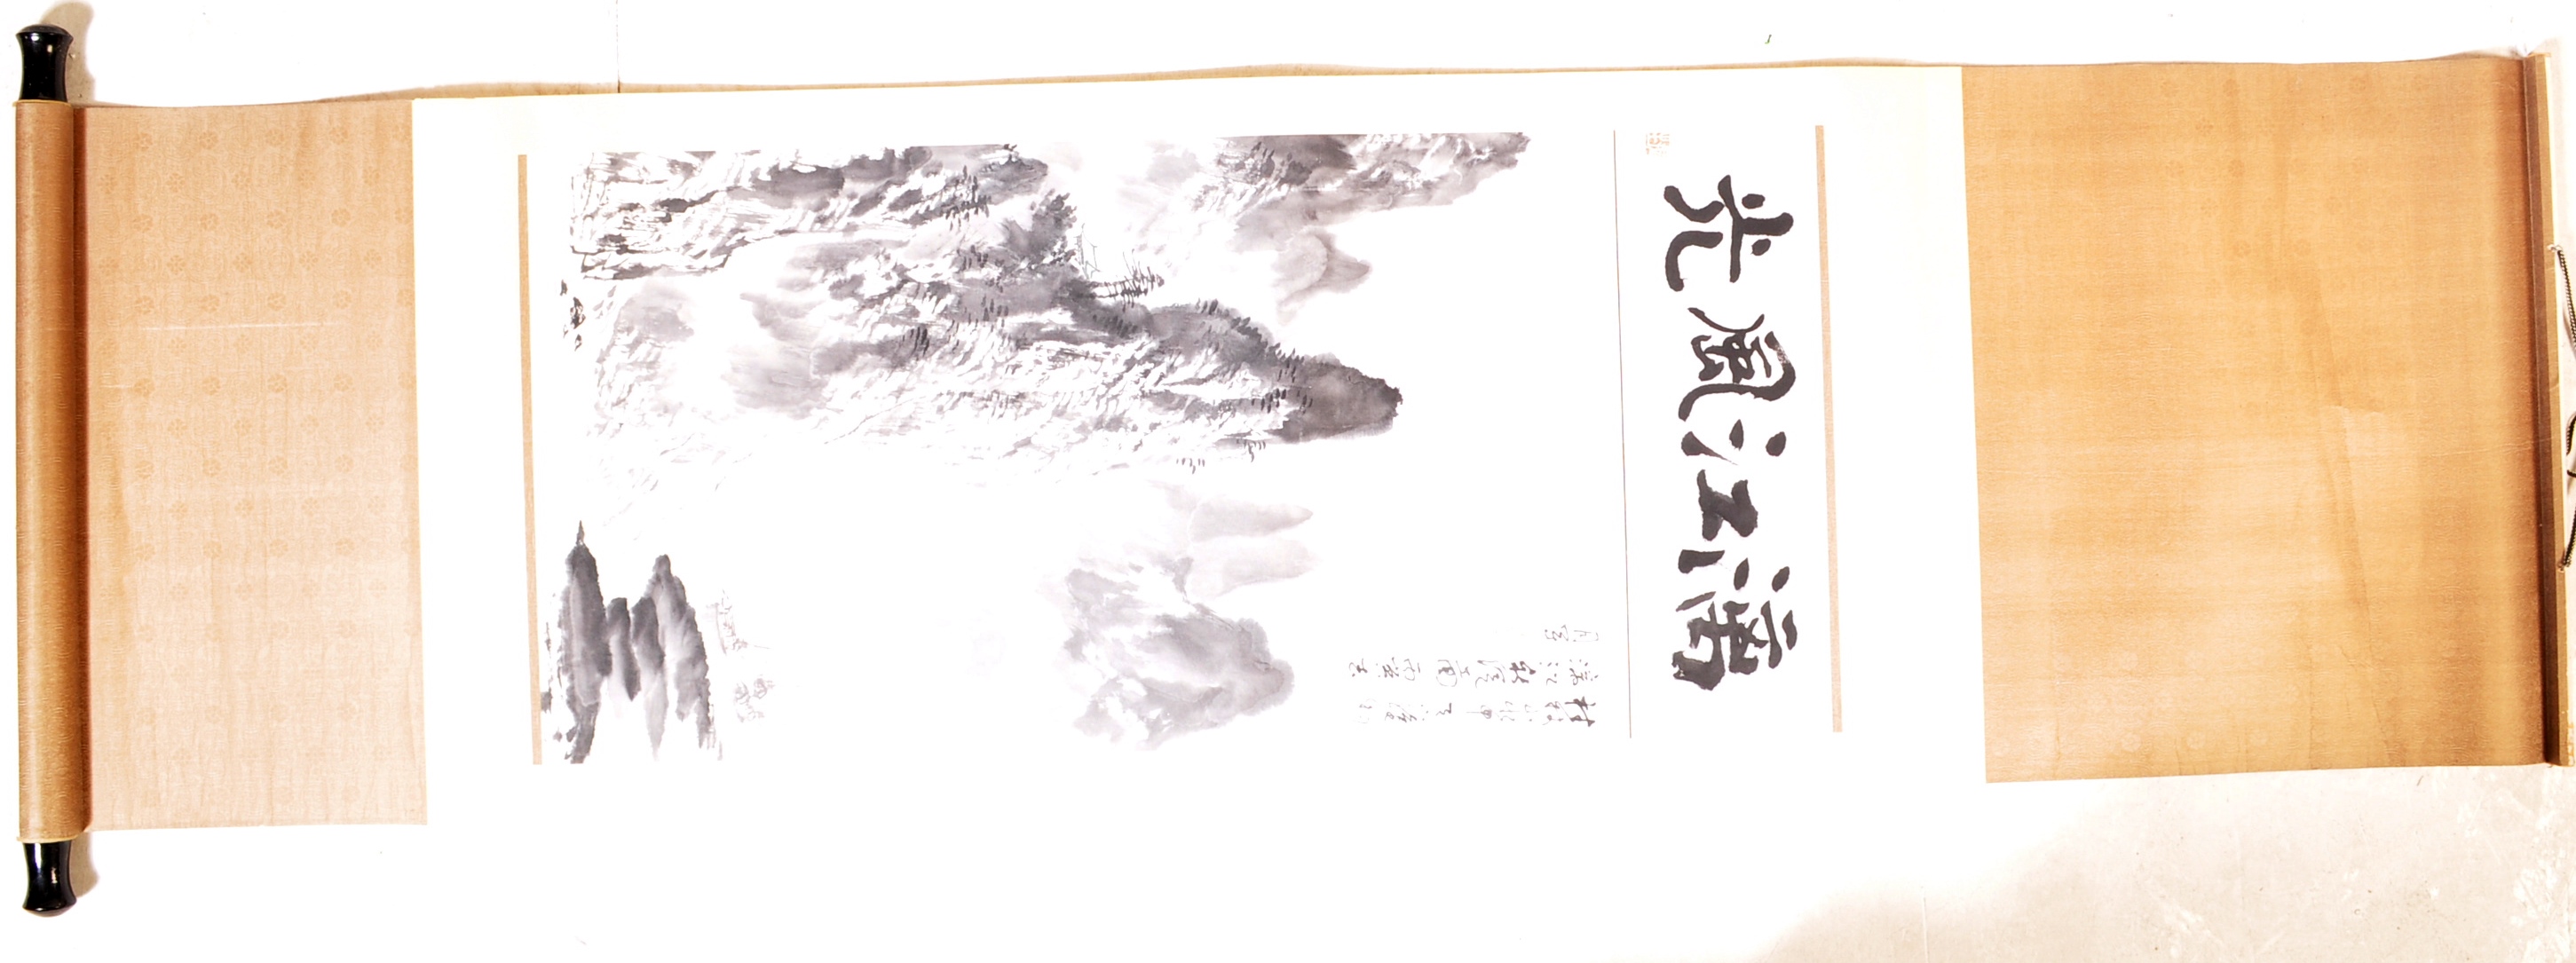 VINTAGE 20TH CENTURY CHINESE INK SCROLL WITH LANDSCAPE - Image 2 of 7